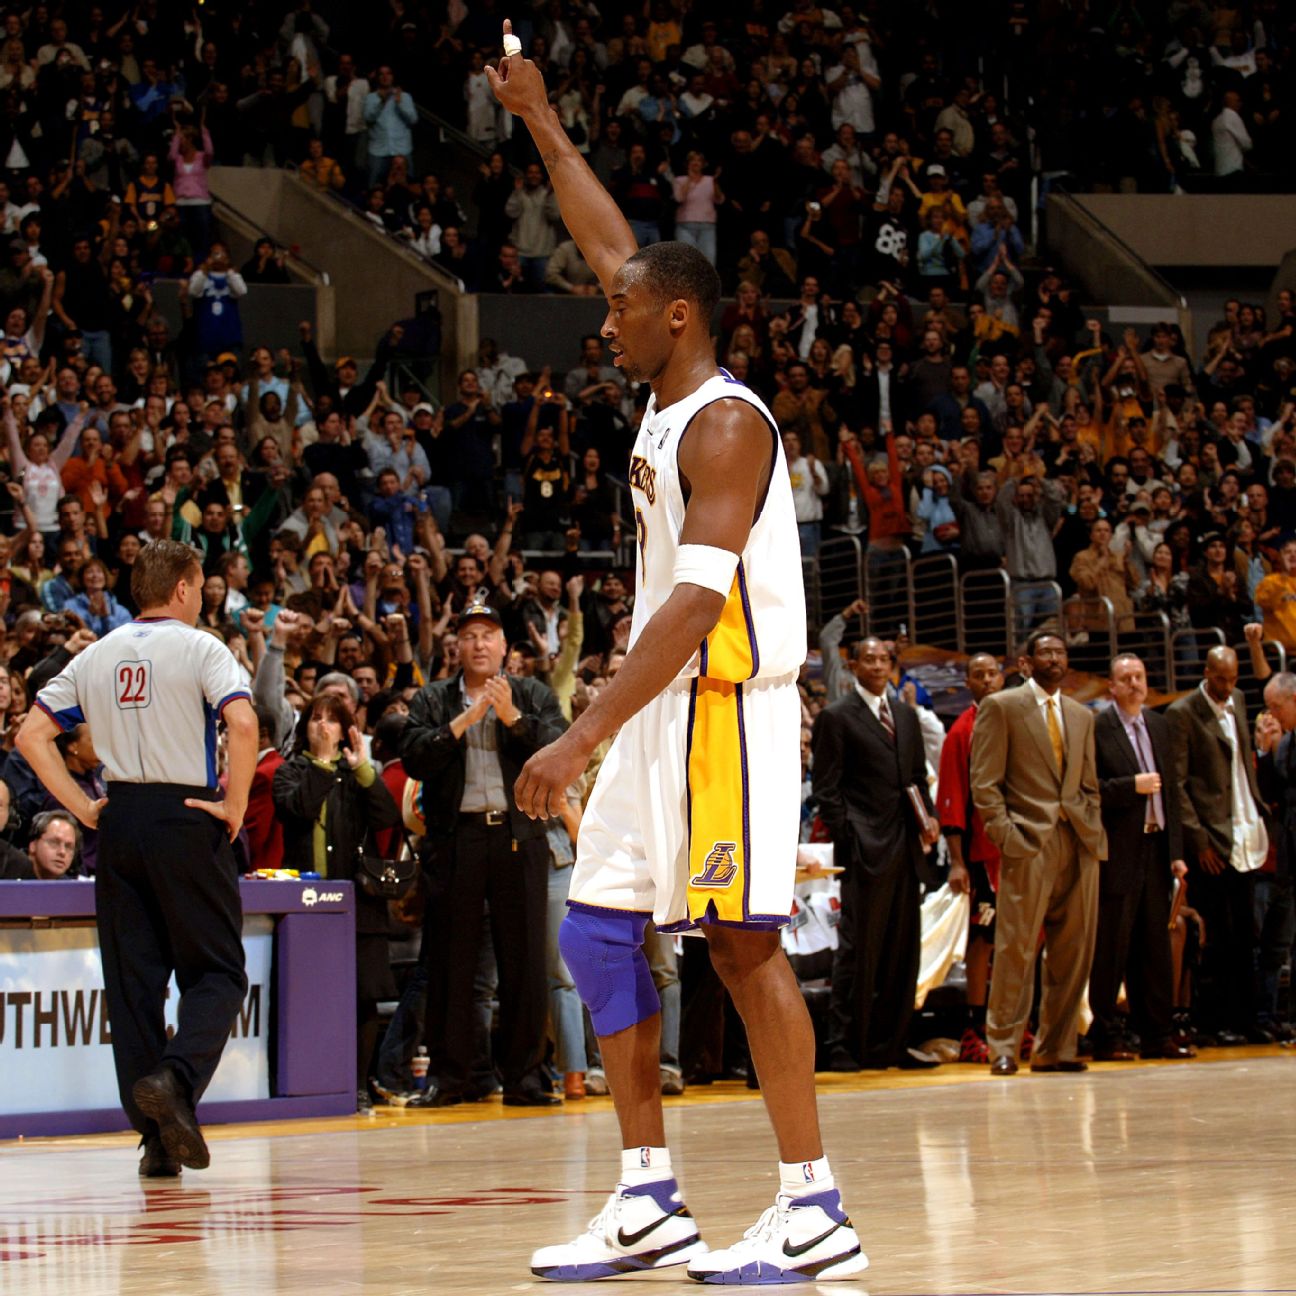 How Los Angeles Lakers' Kobe Bryant made history with 81-point game